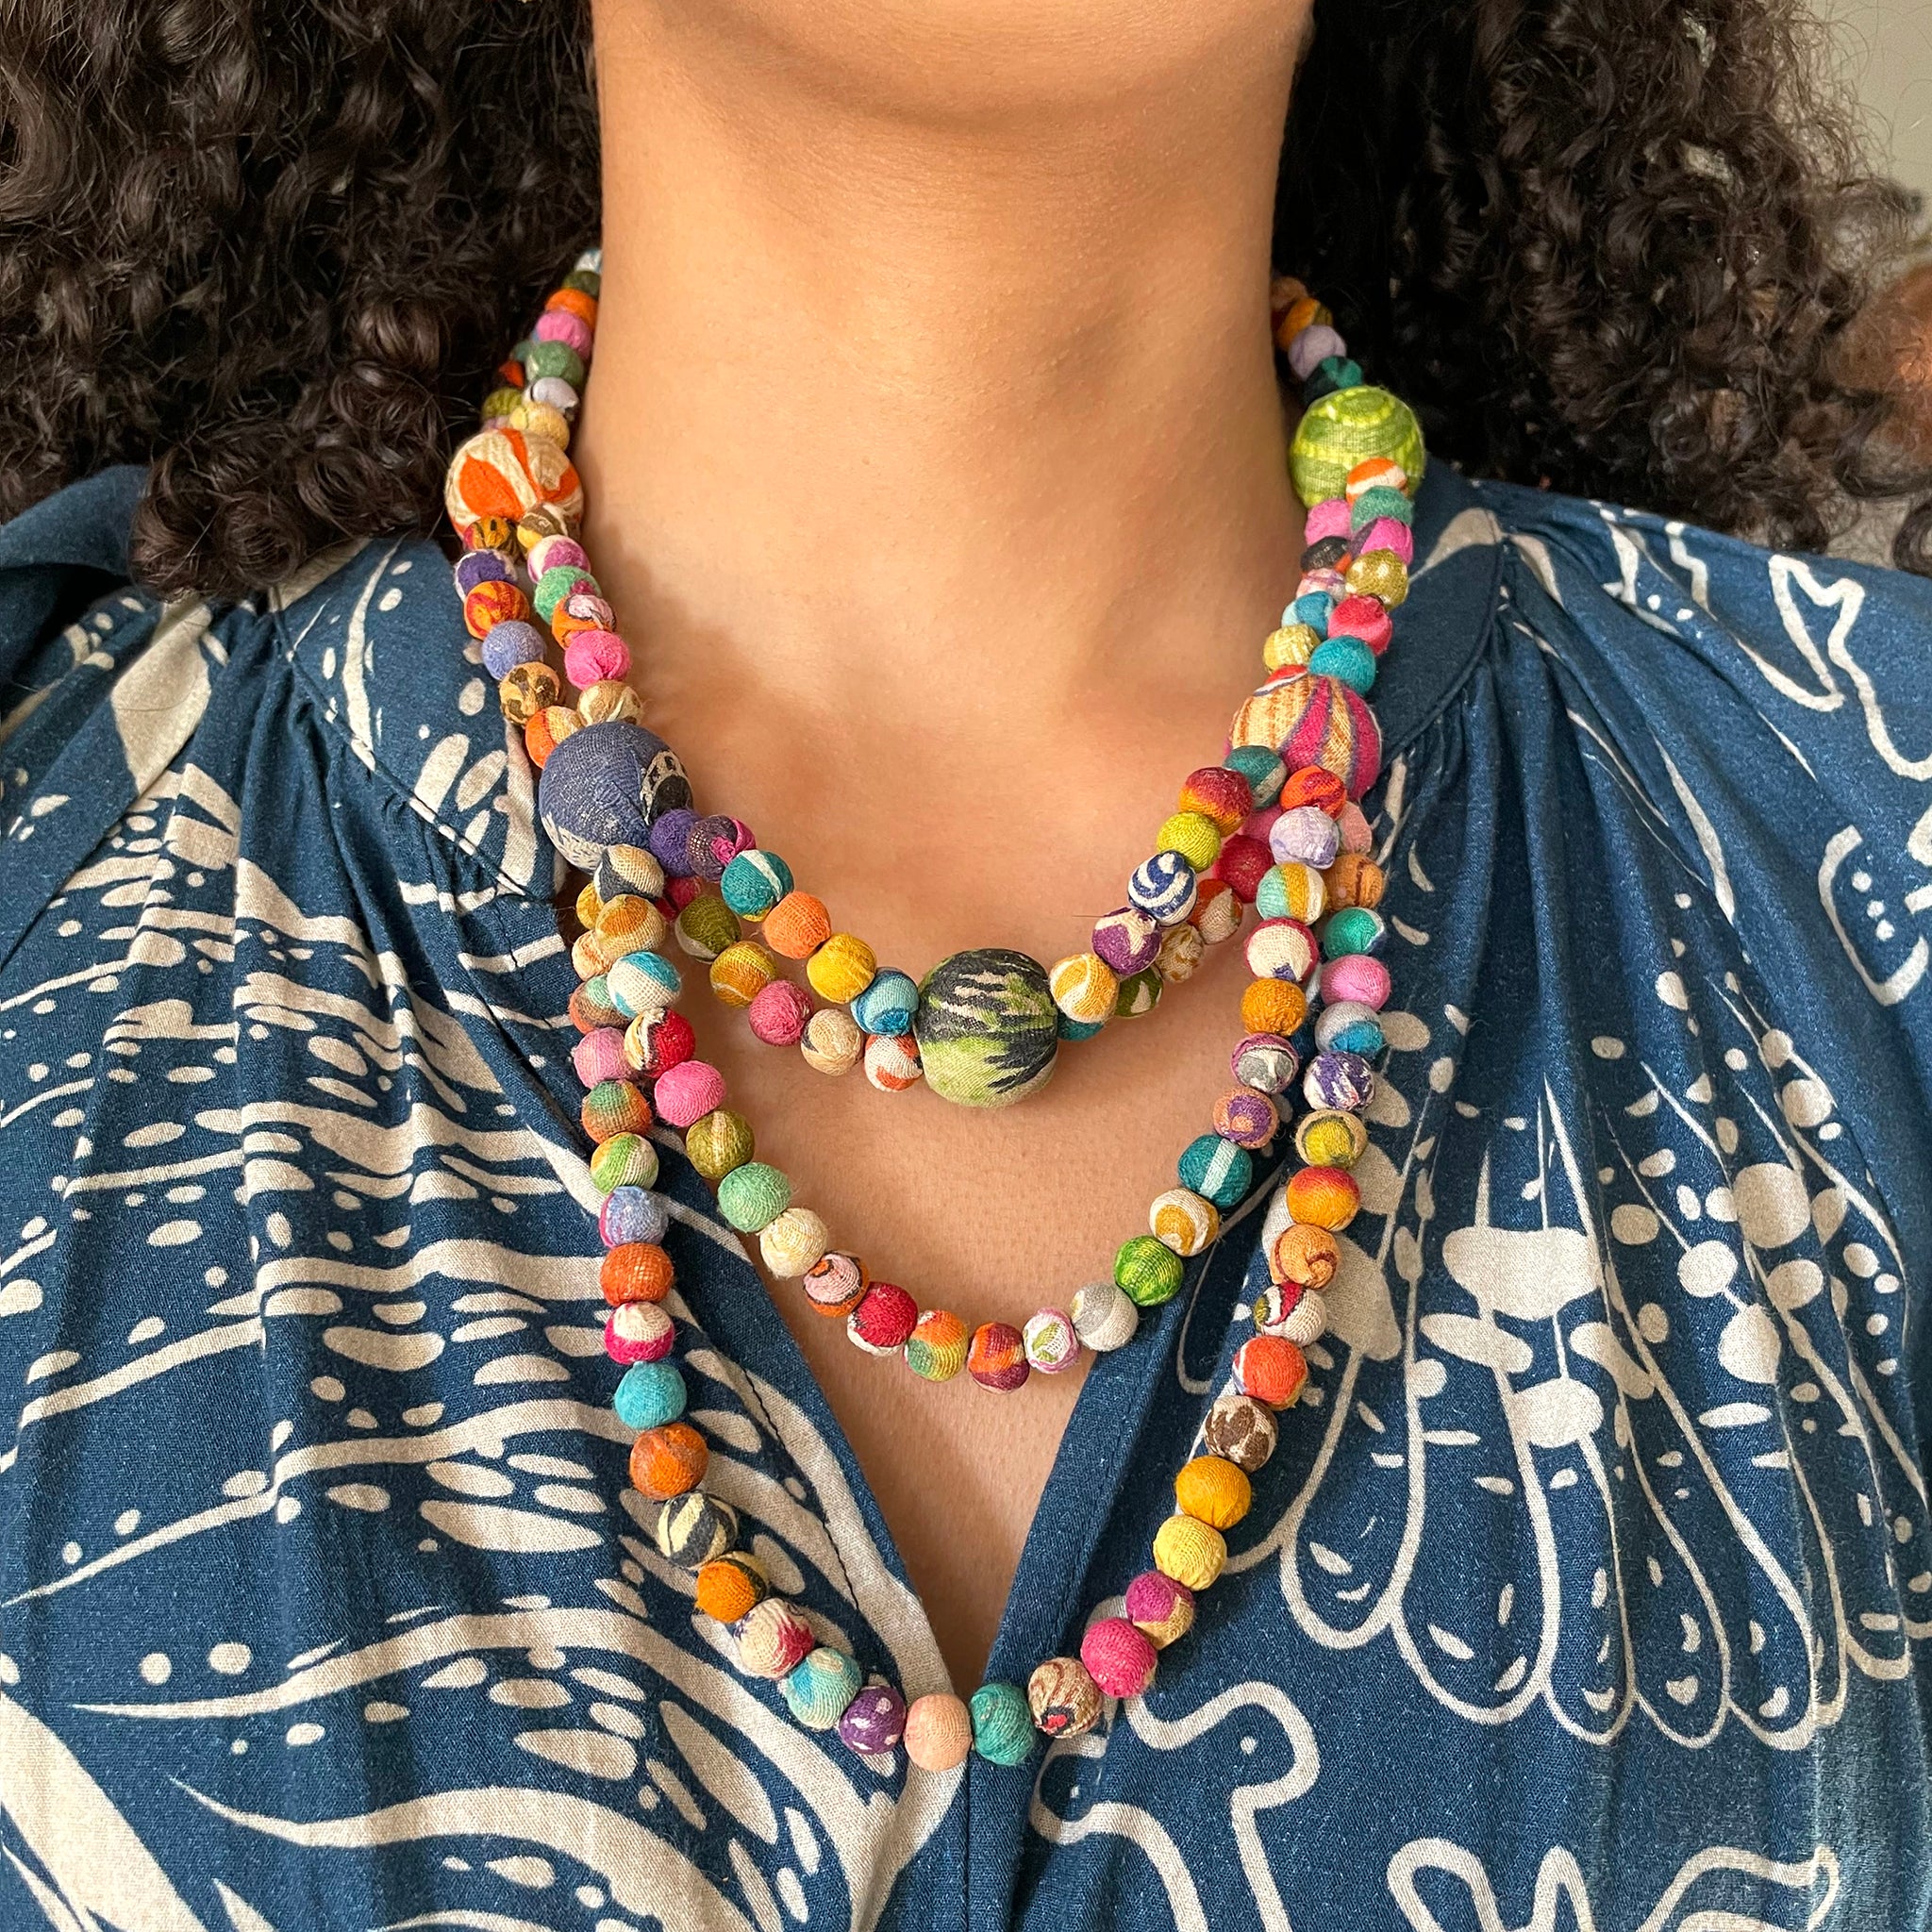 A close up of a woman's neckline shows a colorful necklace.